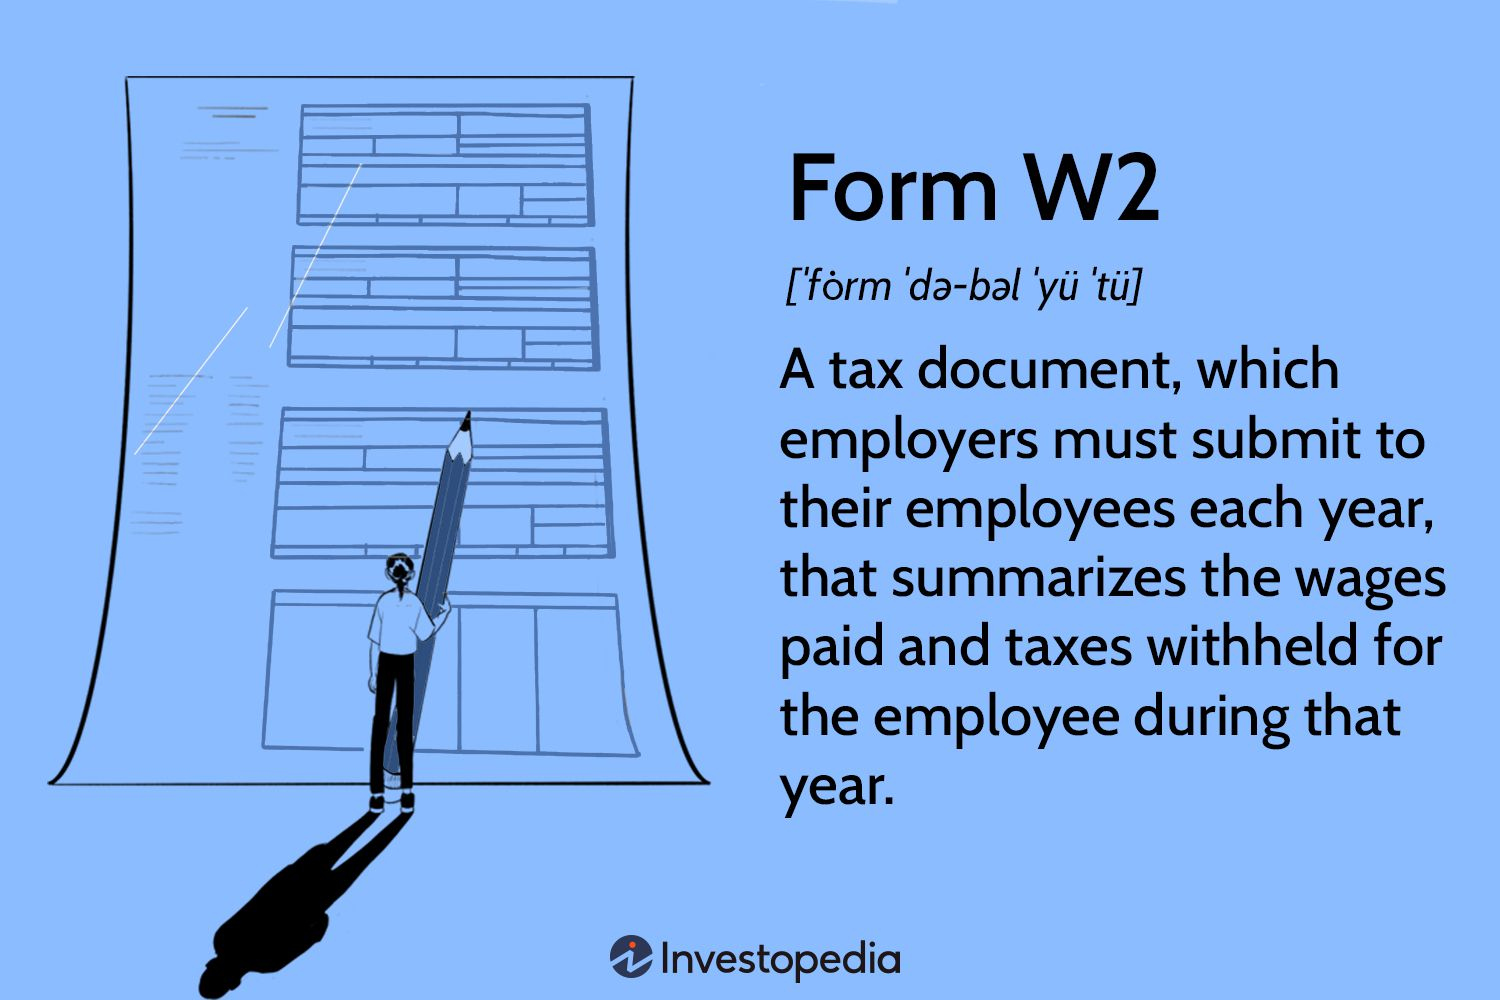 Form W-2 Wage And Tax Statement: What It Is And How To Read It inside When Does W2 Forms Come Out